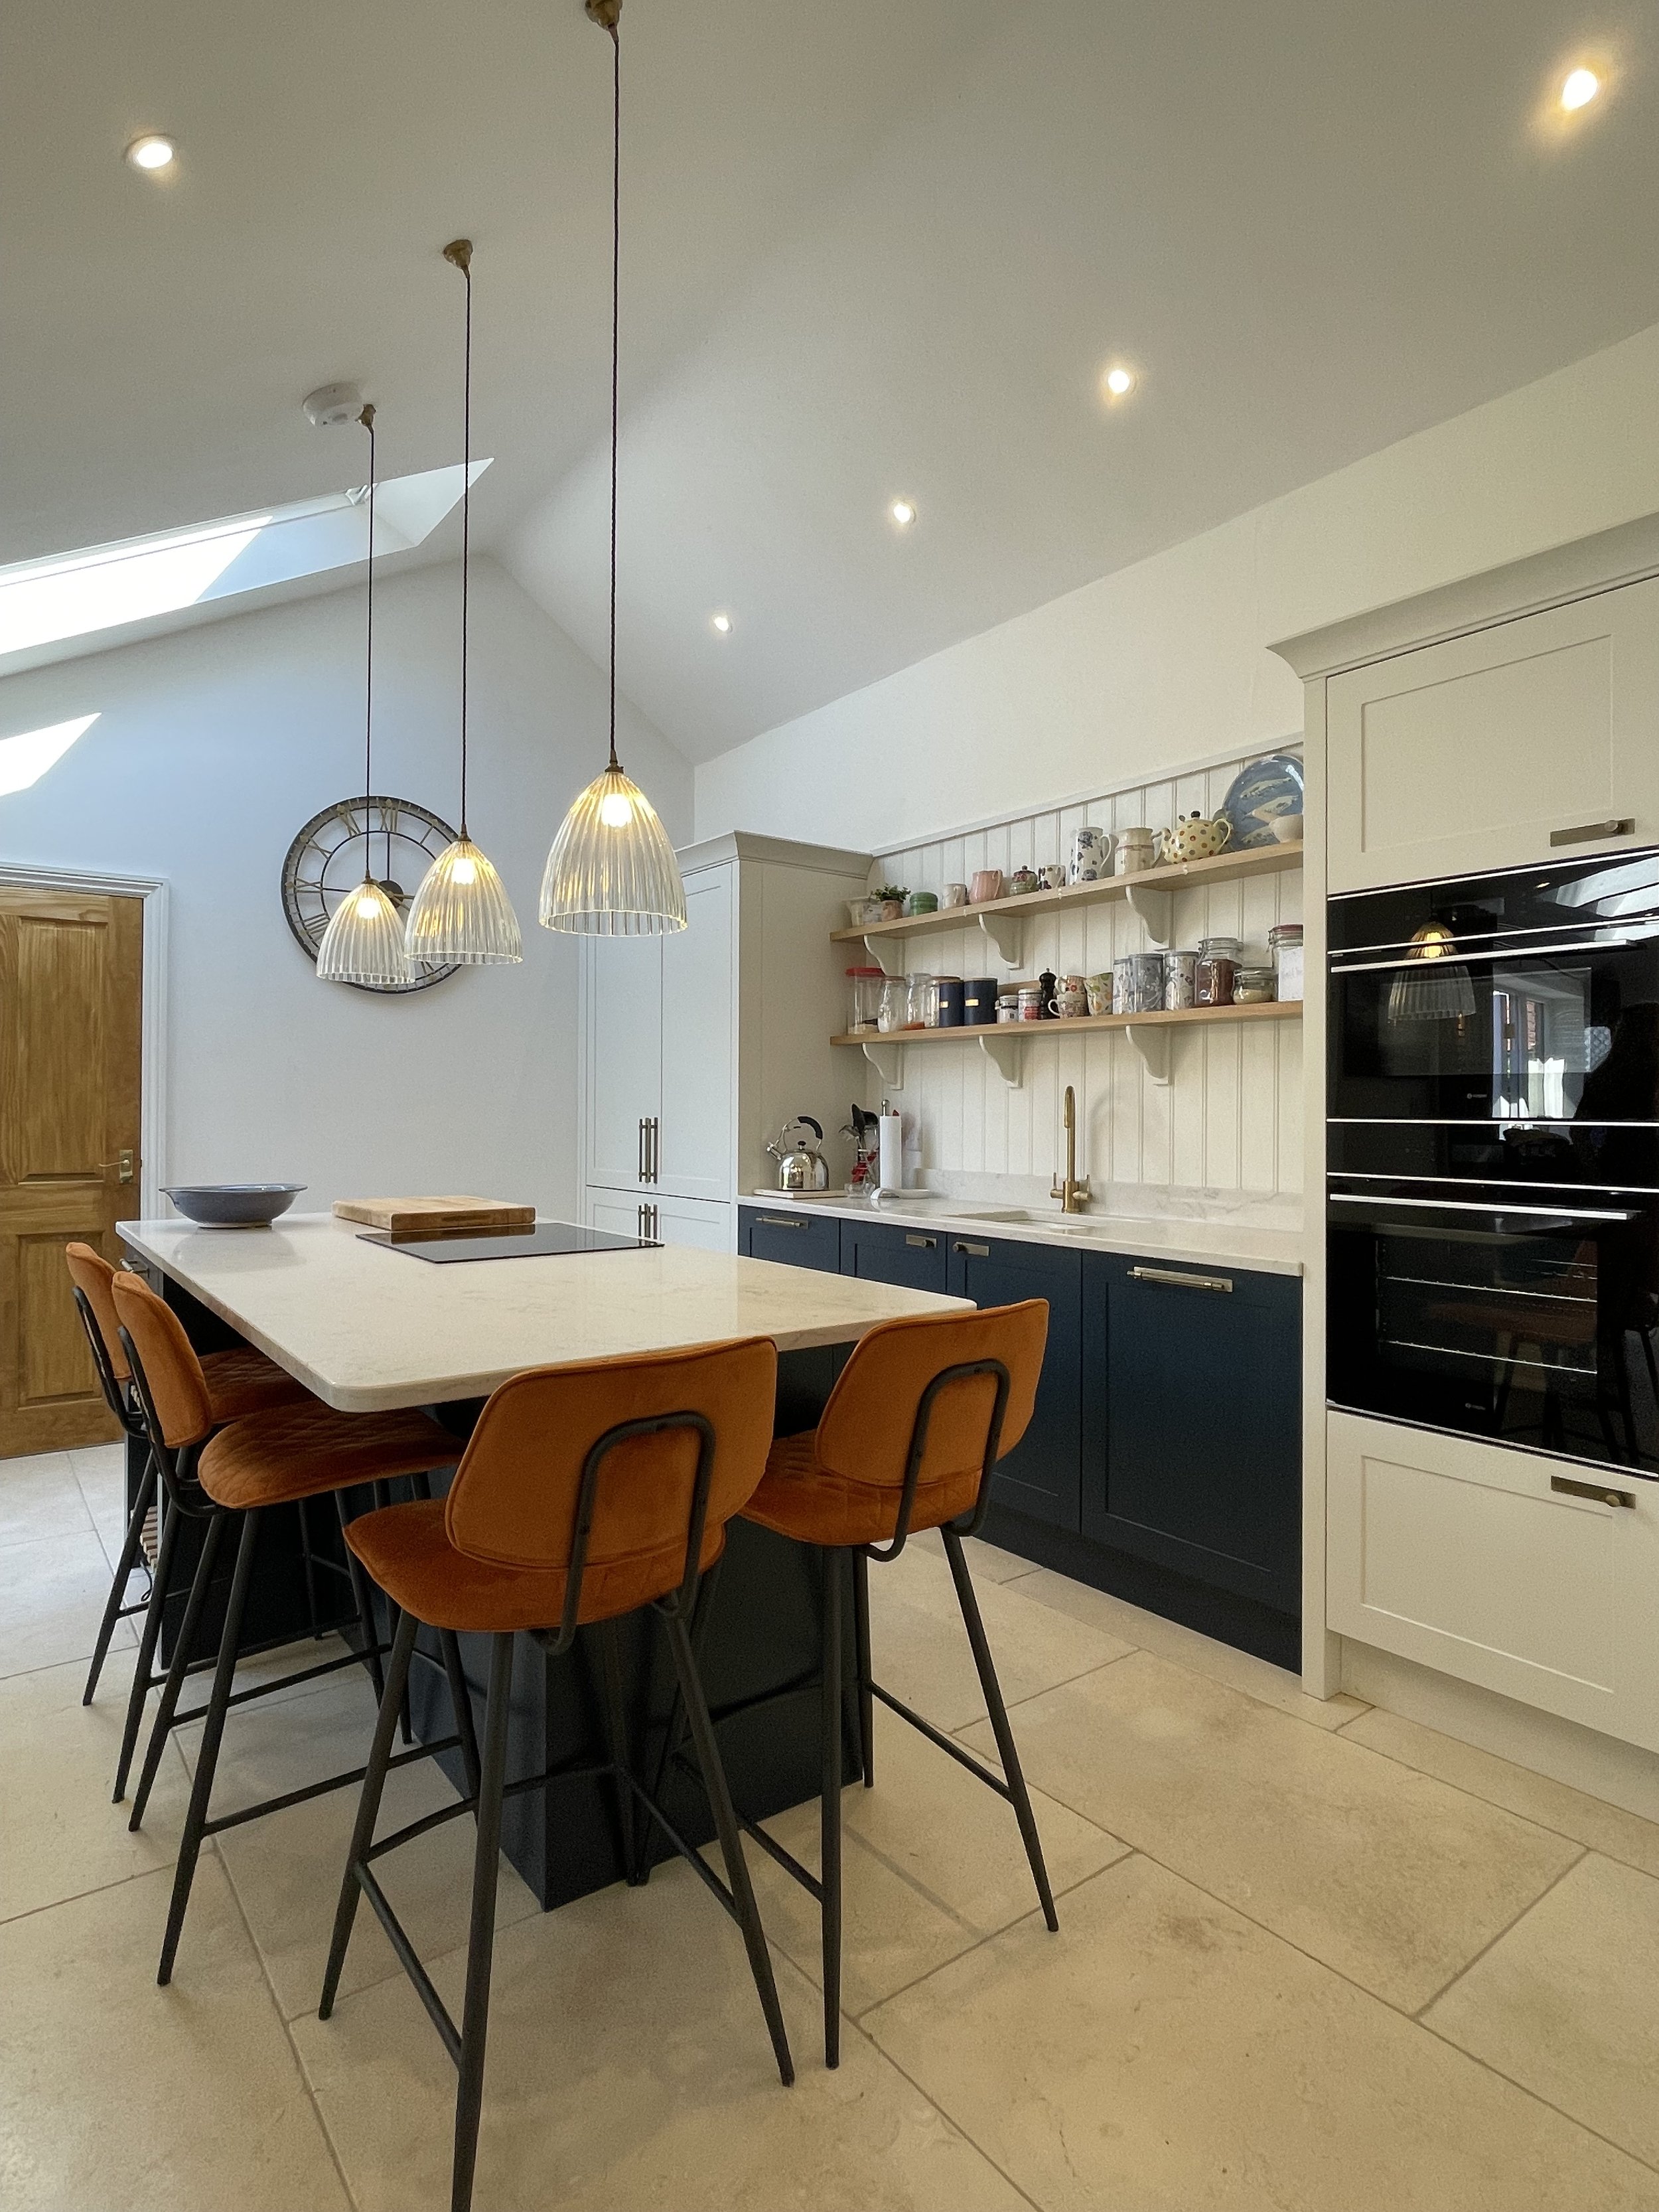 Modern kitchen extension to traditional building 